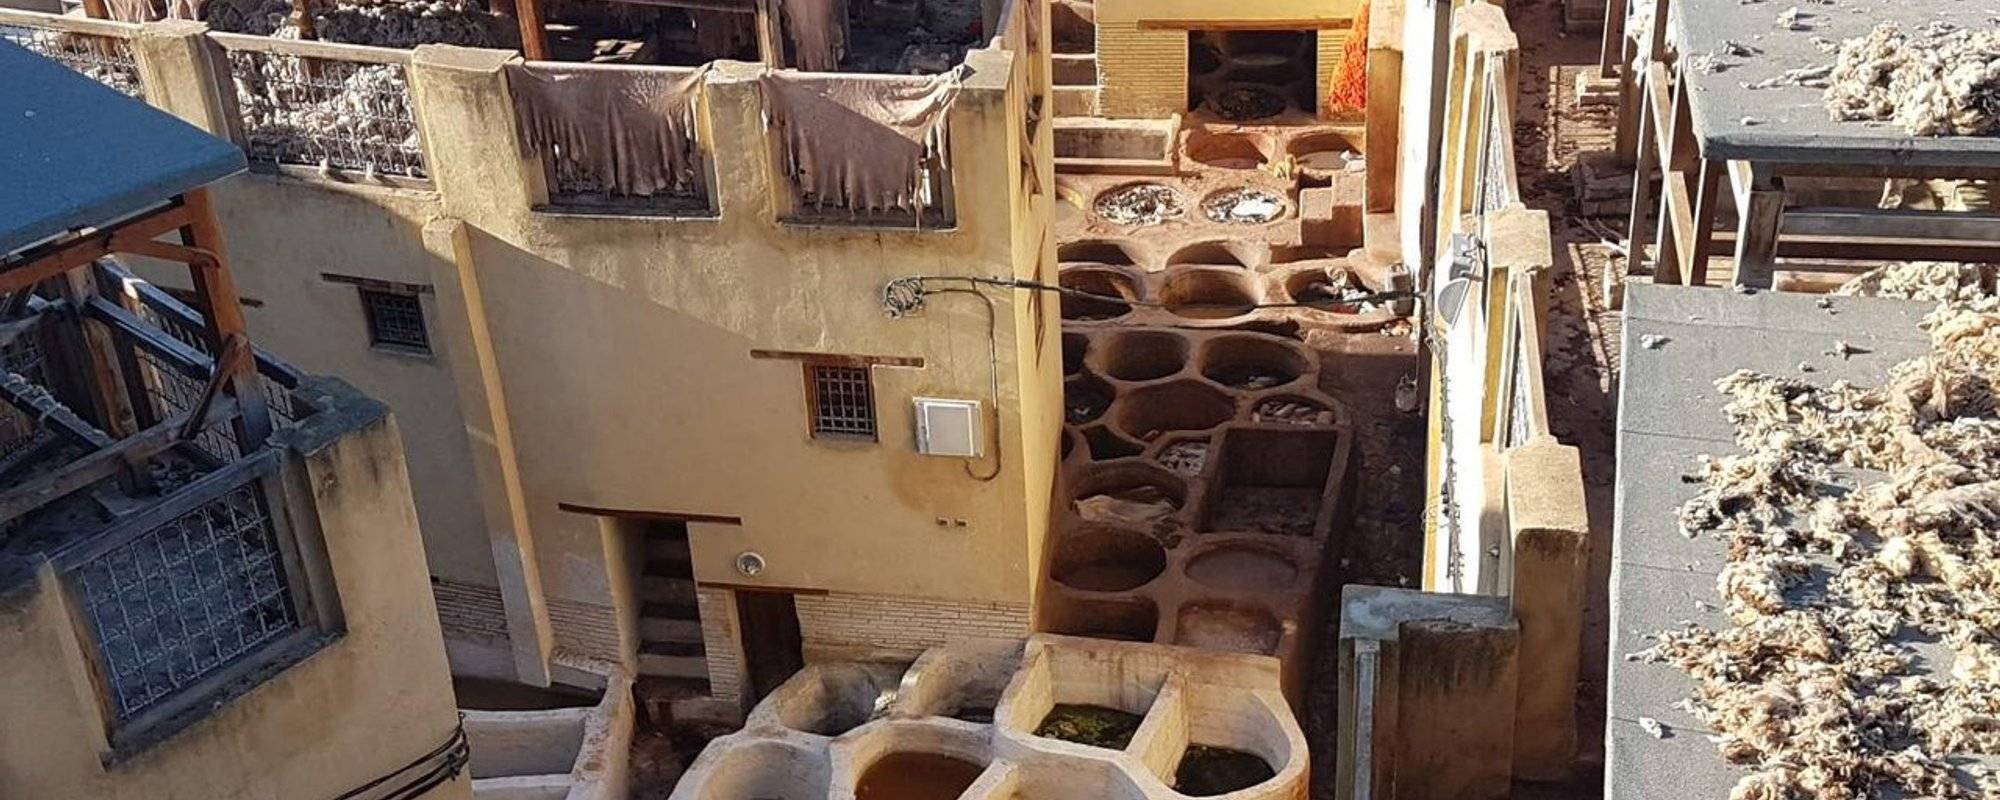 Chouara Tannery in Fes : Visiting One of the Oldest Tanneries in the World